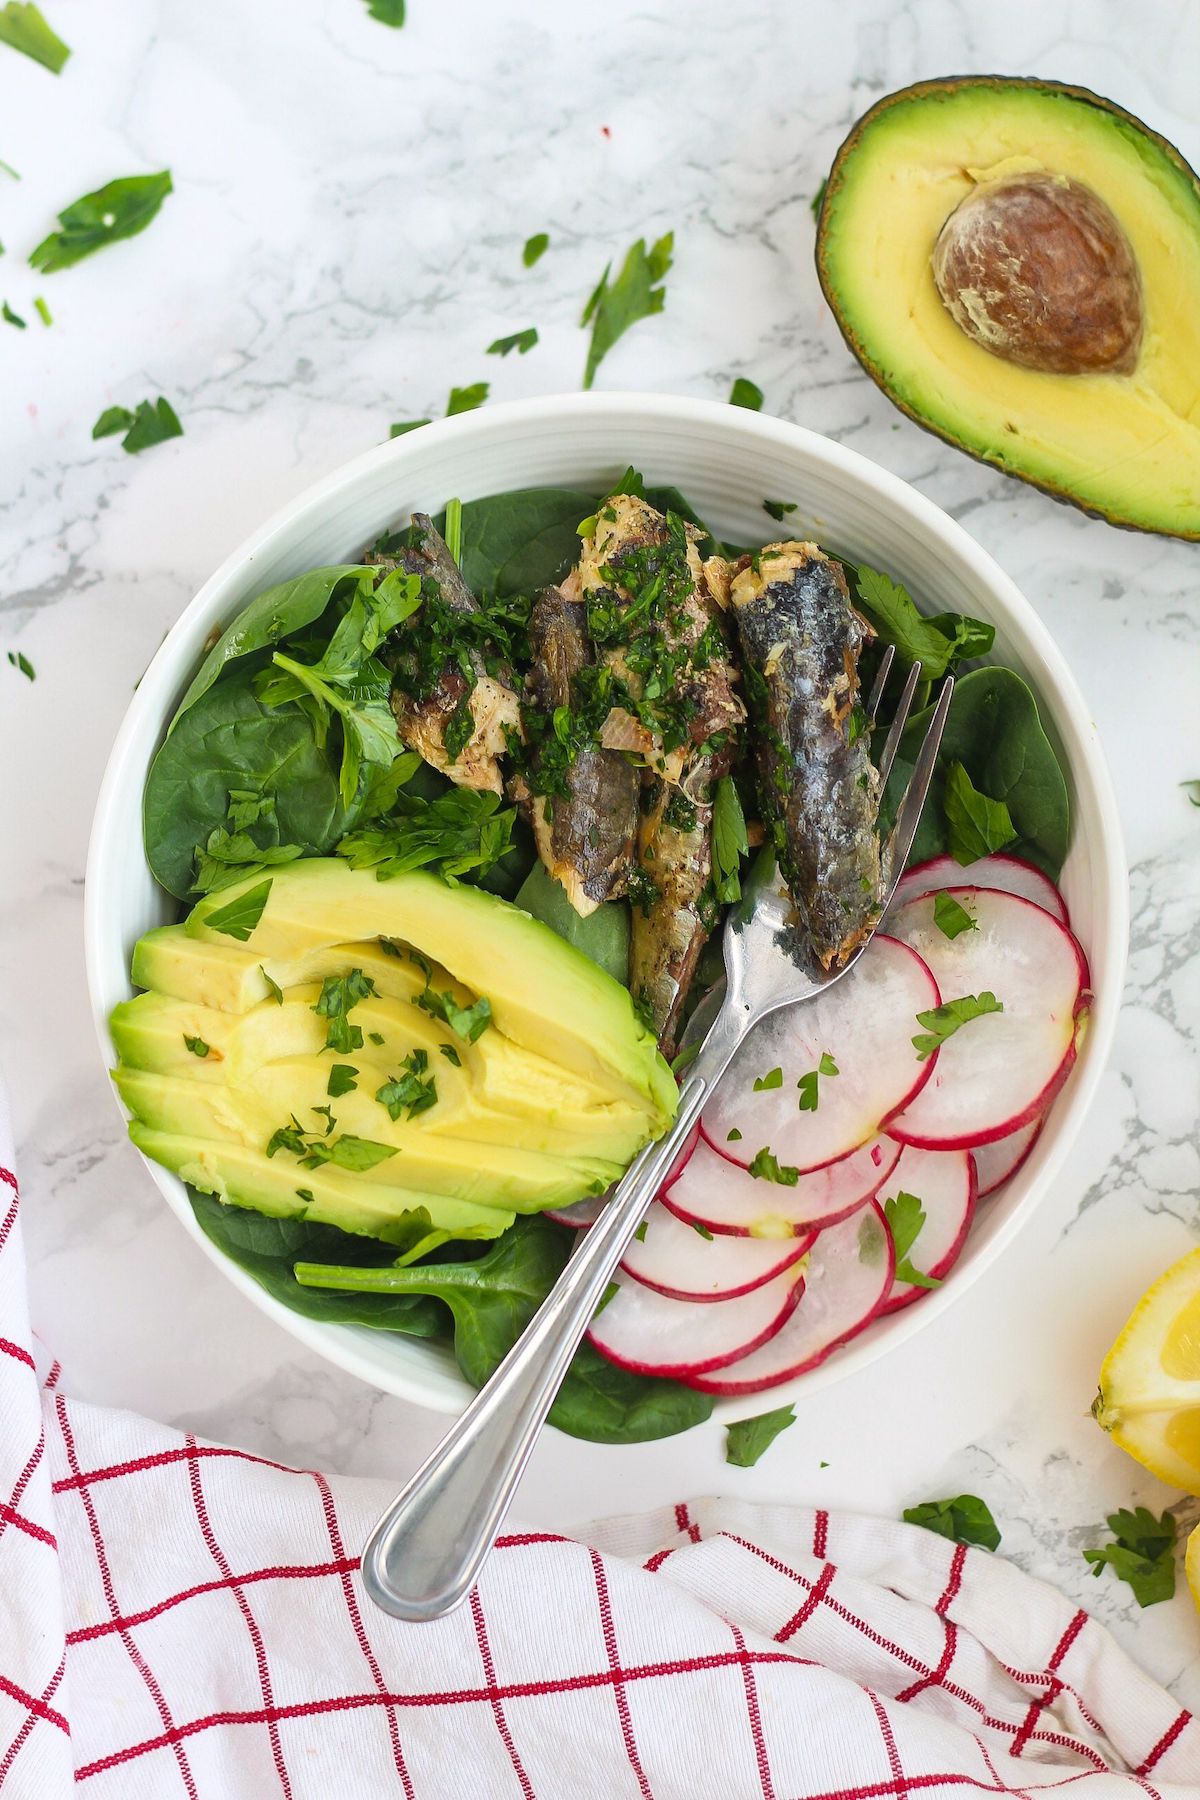 10 Mediterranean Diet Approved Recipes to Add to Your Meal Plan - Sardine and Avocado Salad